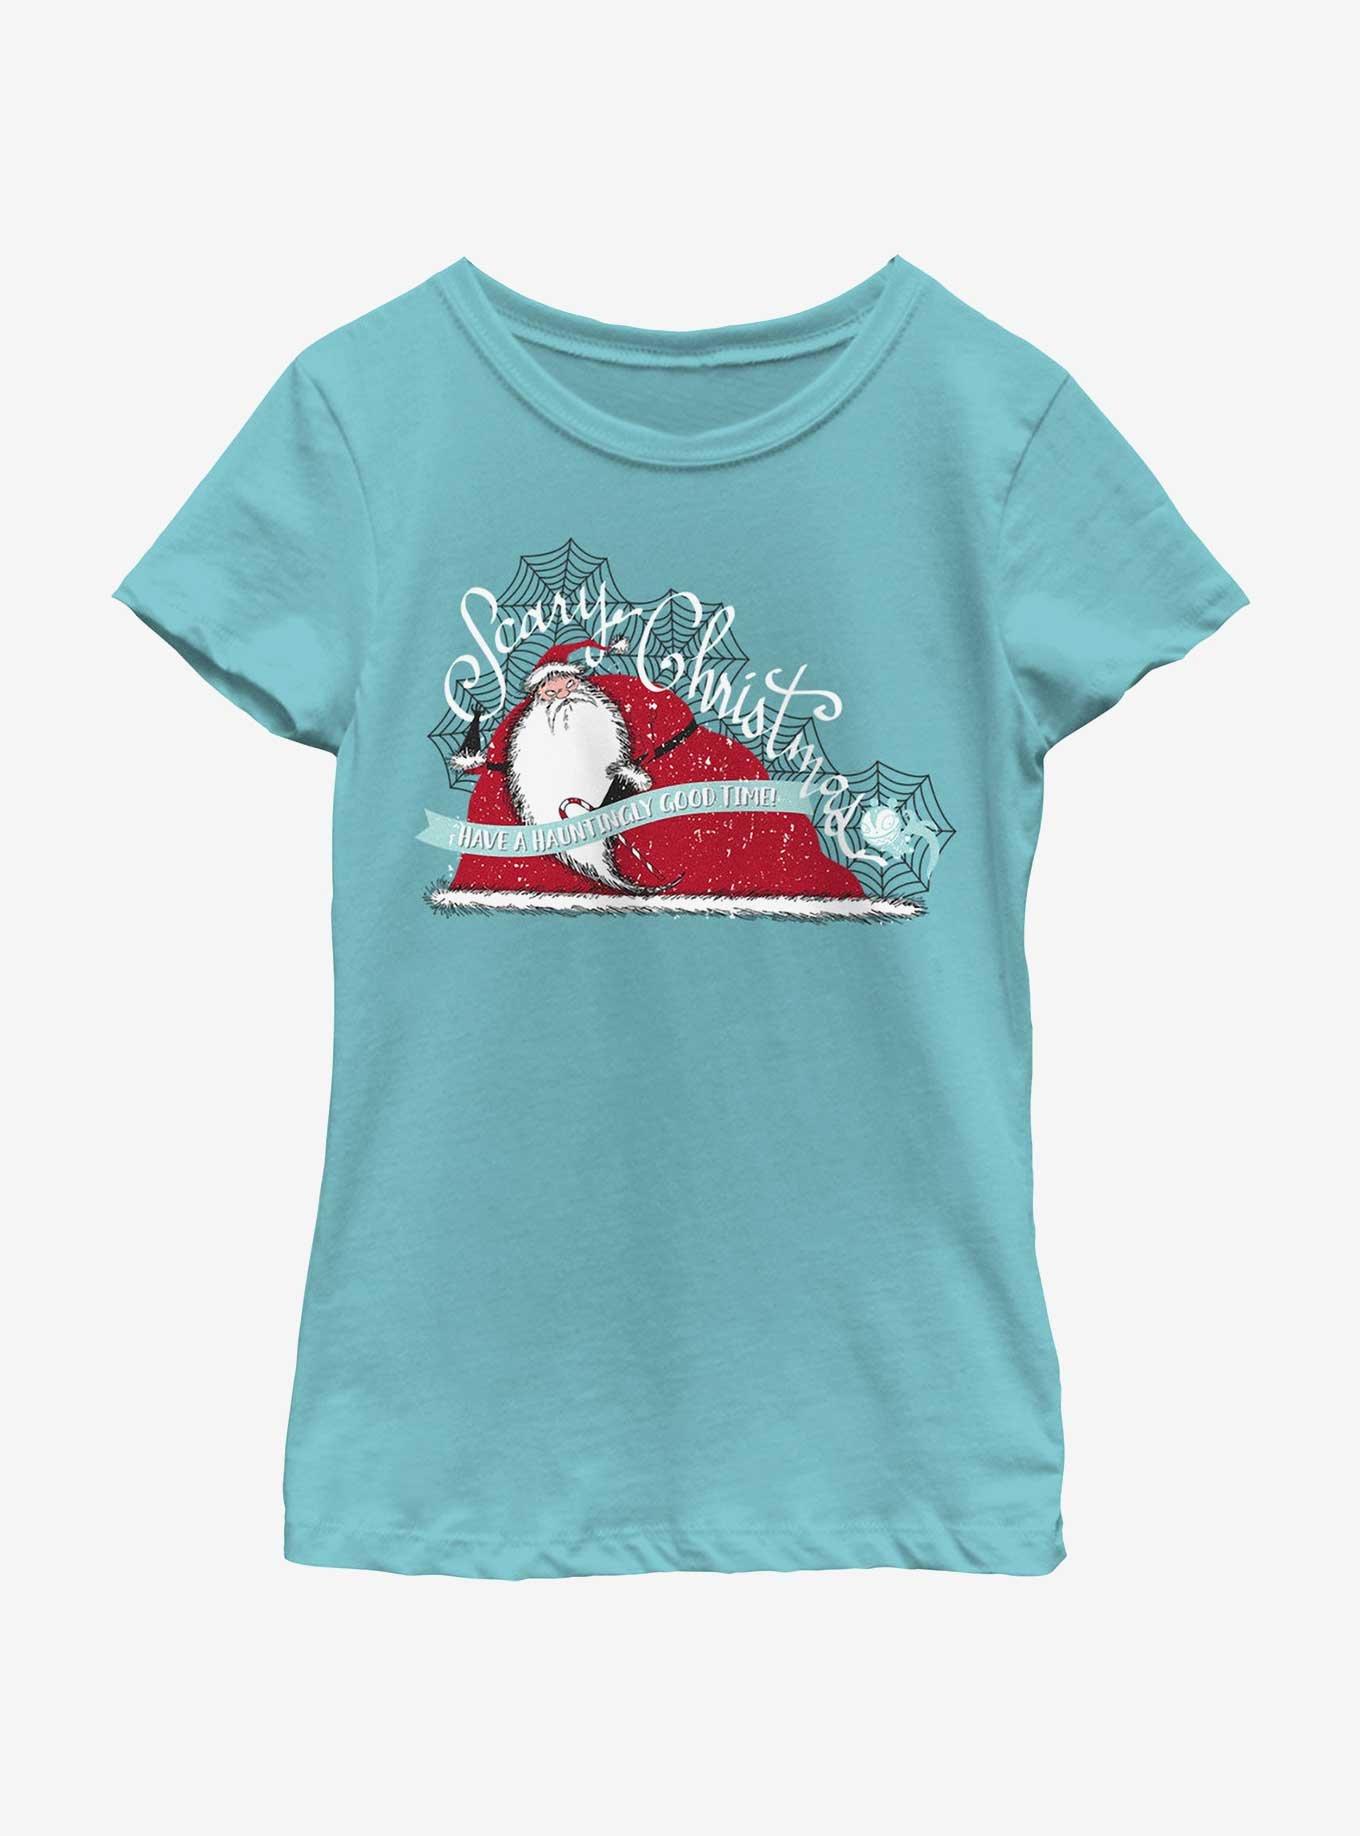 Disney Nightmare Before Christmas Scary Christmas Youth Girls T-Shirt, , hi-res